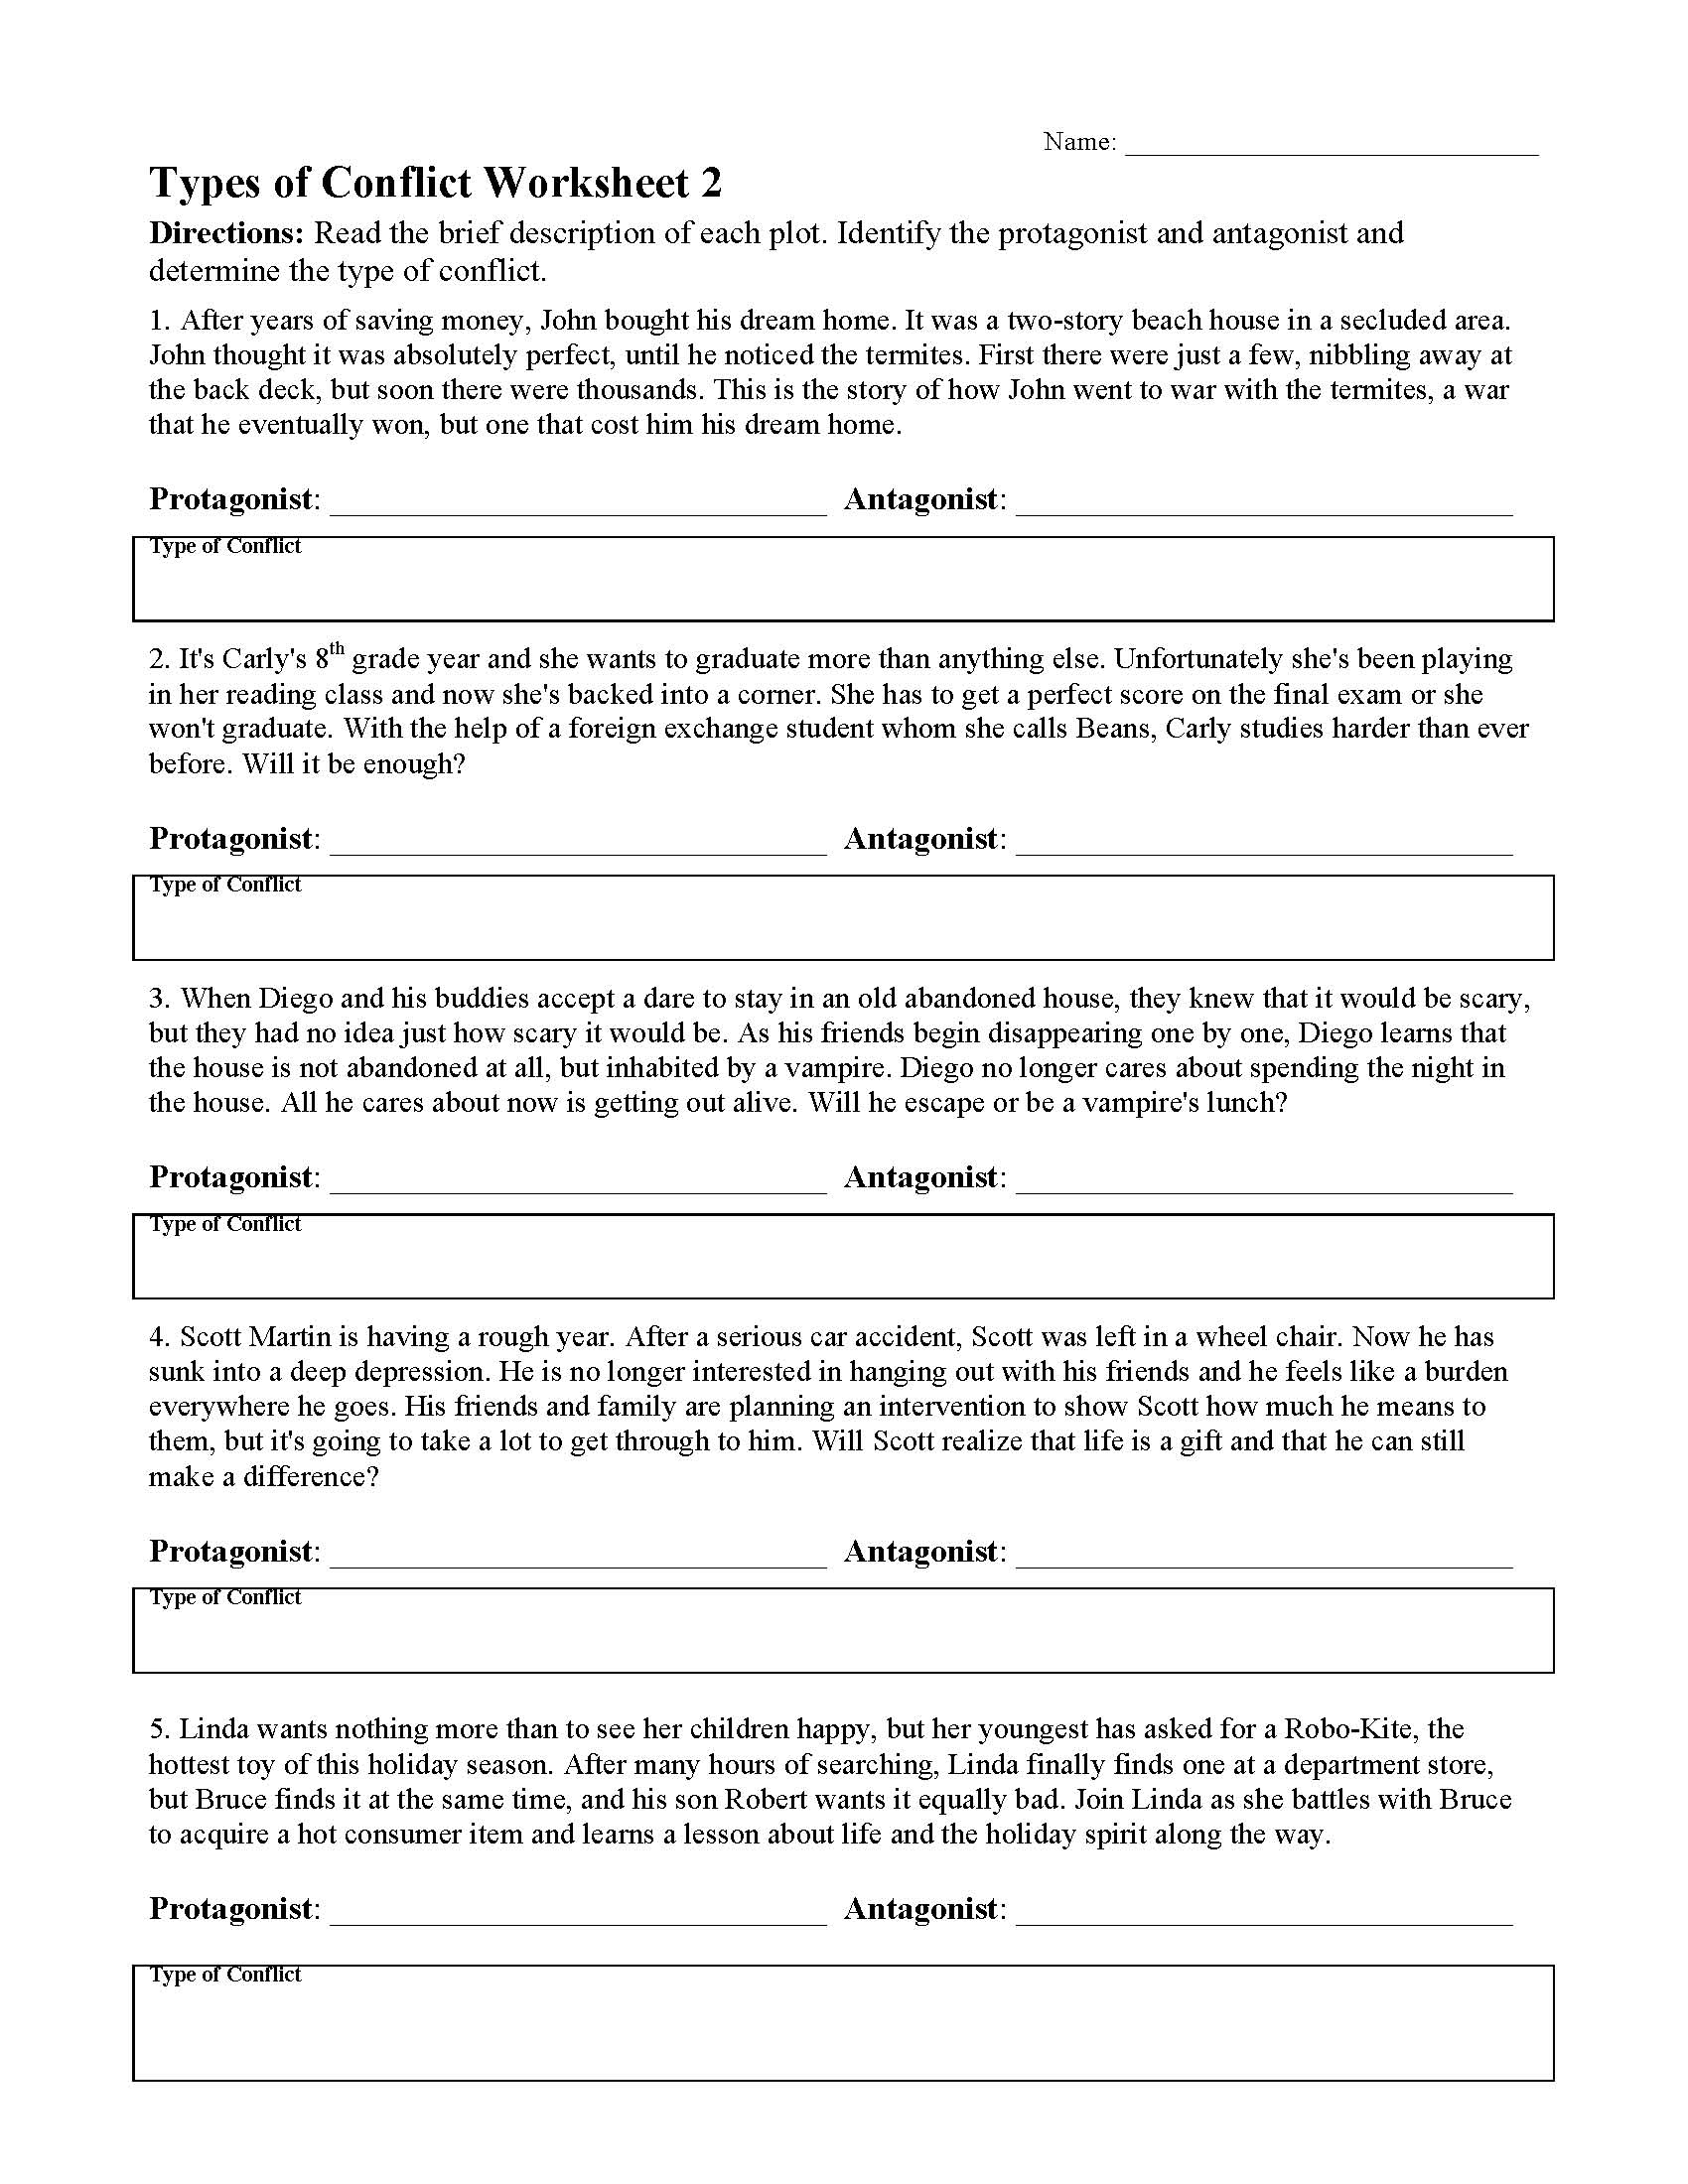 types-of-conflict-worksheet-2-preview